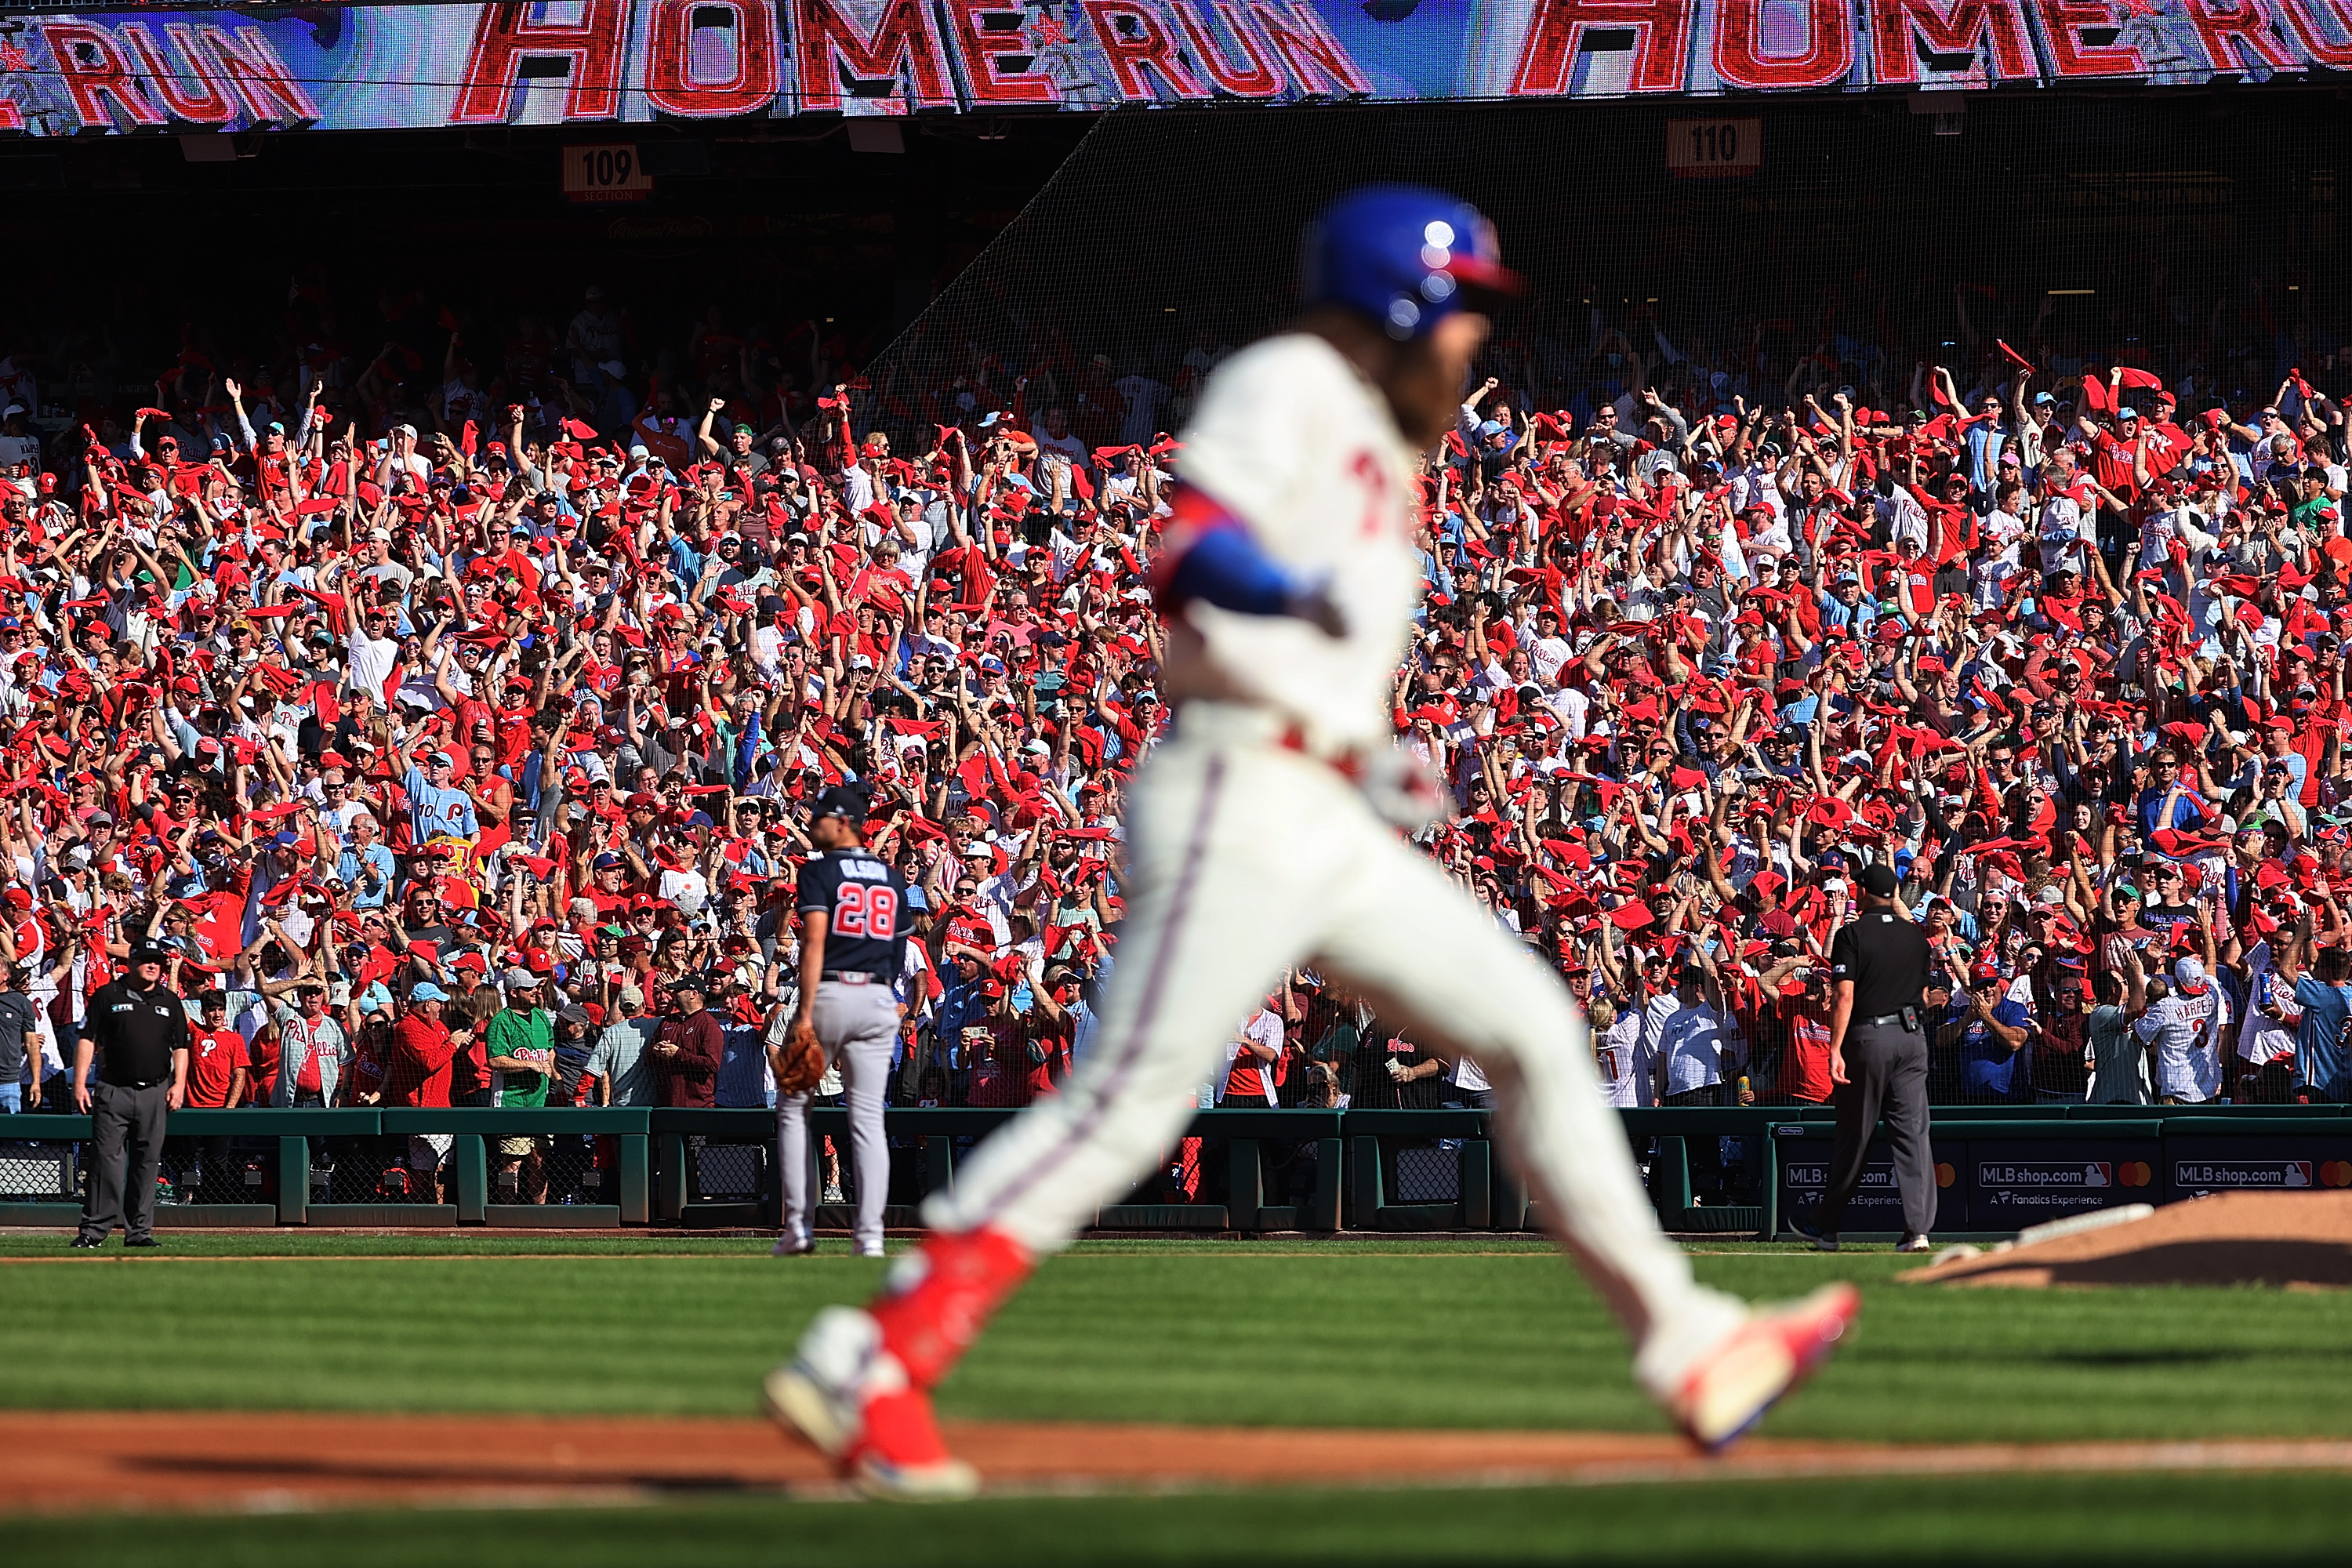 Phillies send Braves, the defending champs home, head to the NLCS